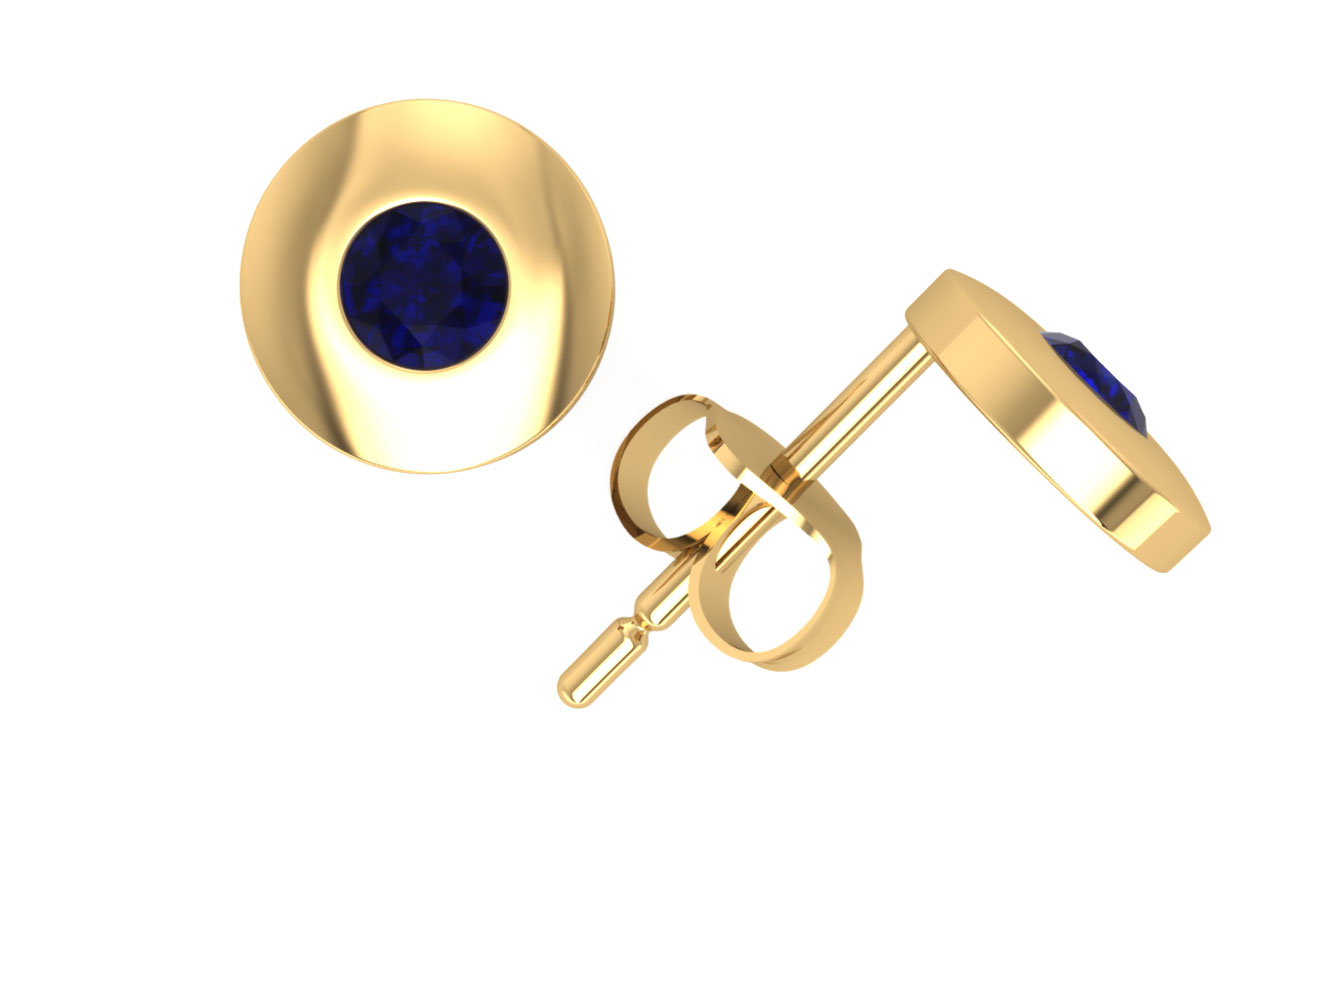 Jewel We Sell Natural 0.25Ct Round Cut Blue Sapphire Stud Earrings 18k White or Yellow Gold Bezel Set New AAA Quality